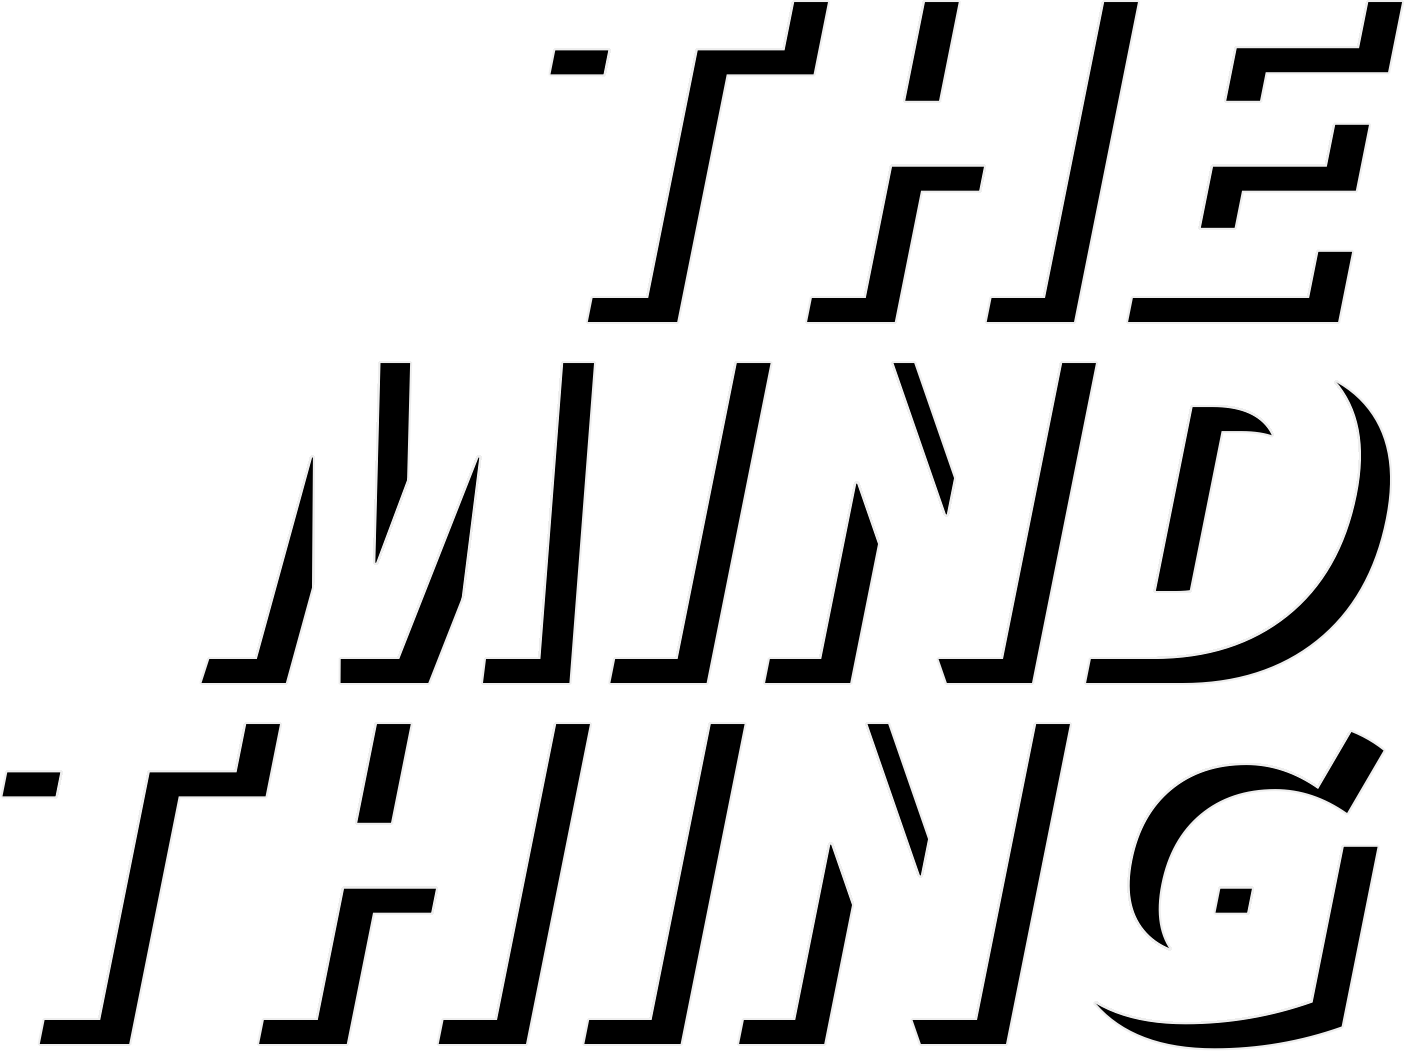 THE MIND THING